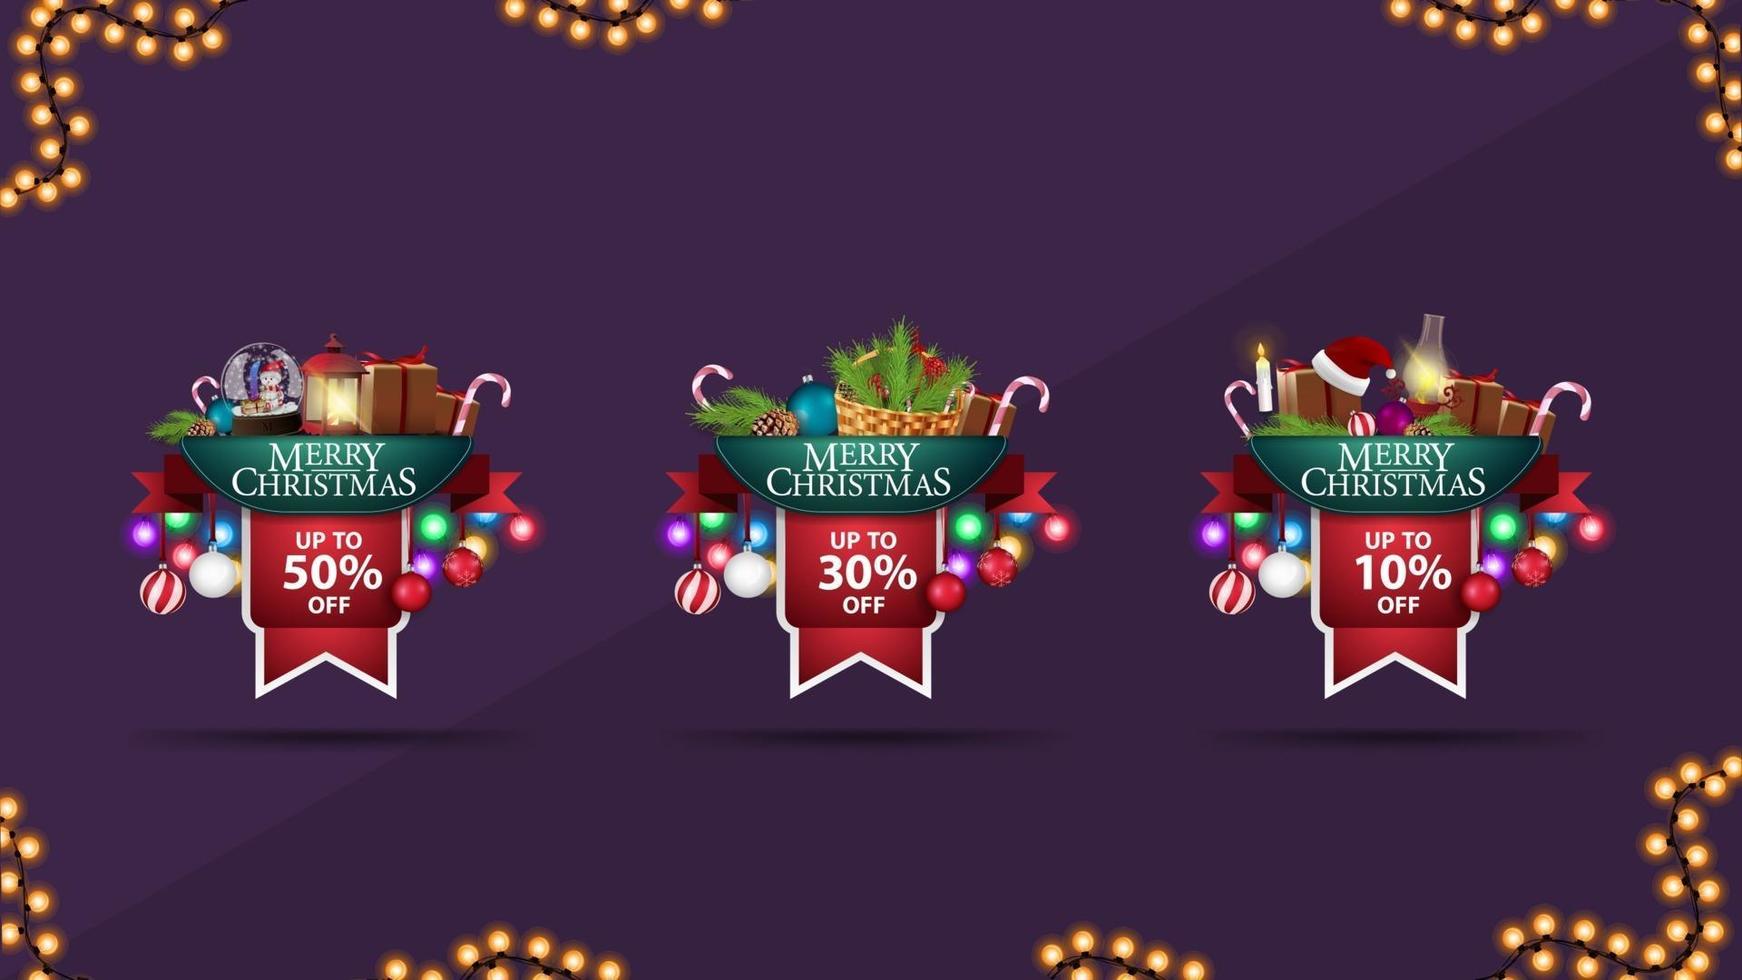 Collection of Christmas 3D volumetric stickers in form of ribbons decorated with presents, garlands and Christmas elements. vector